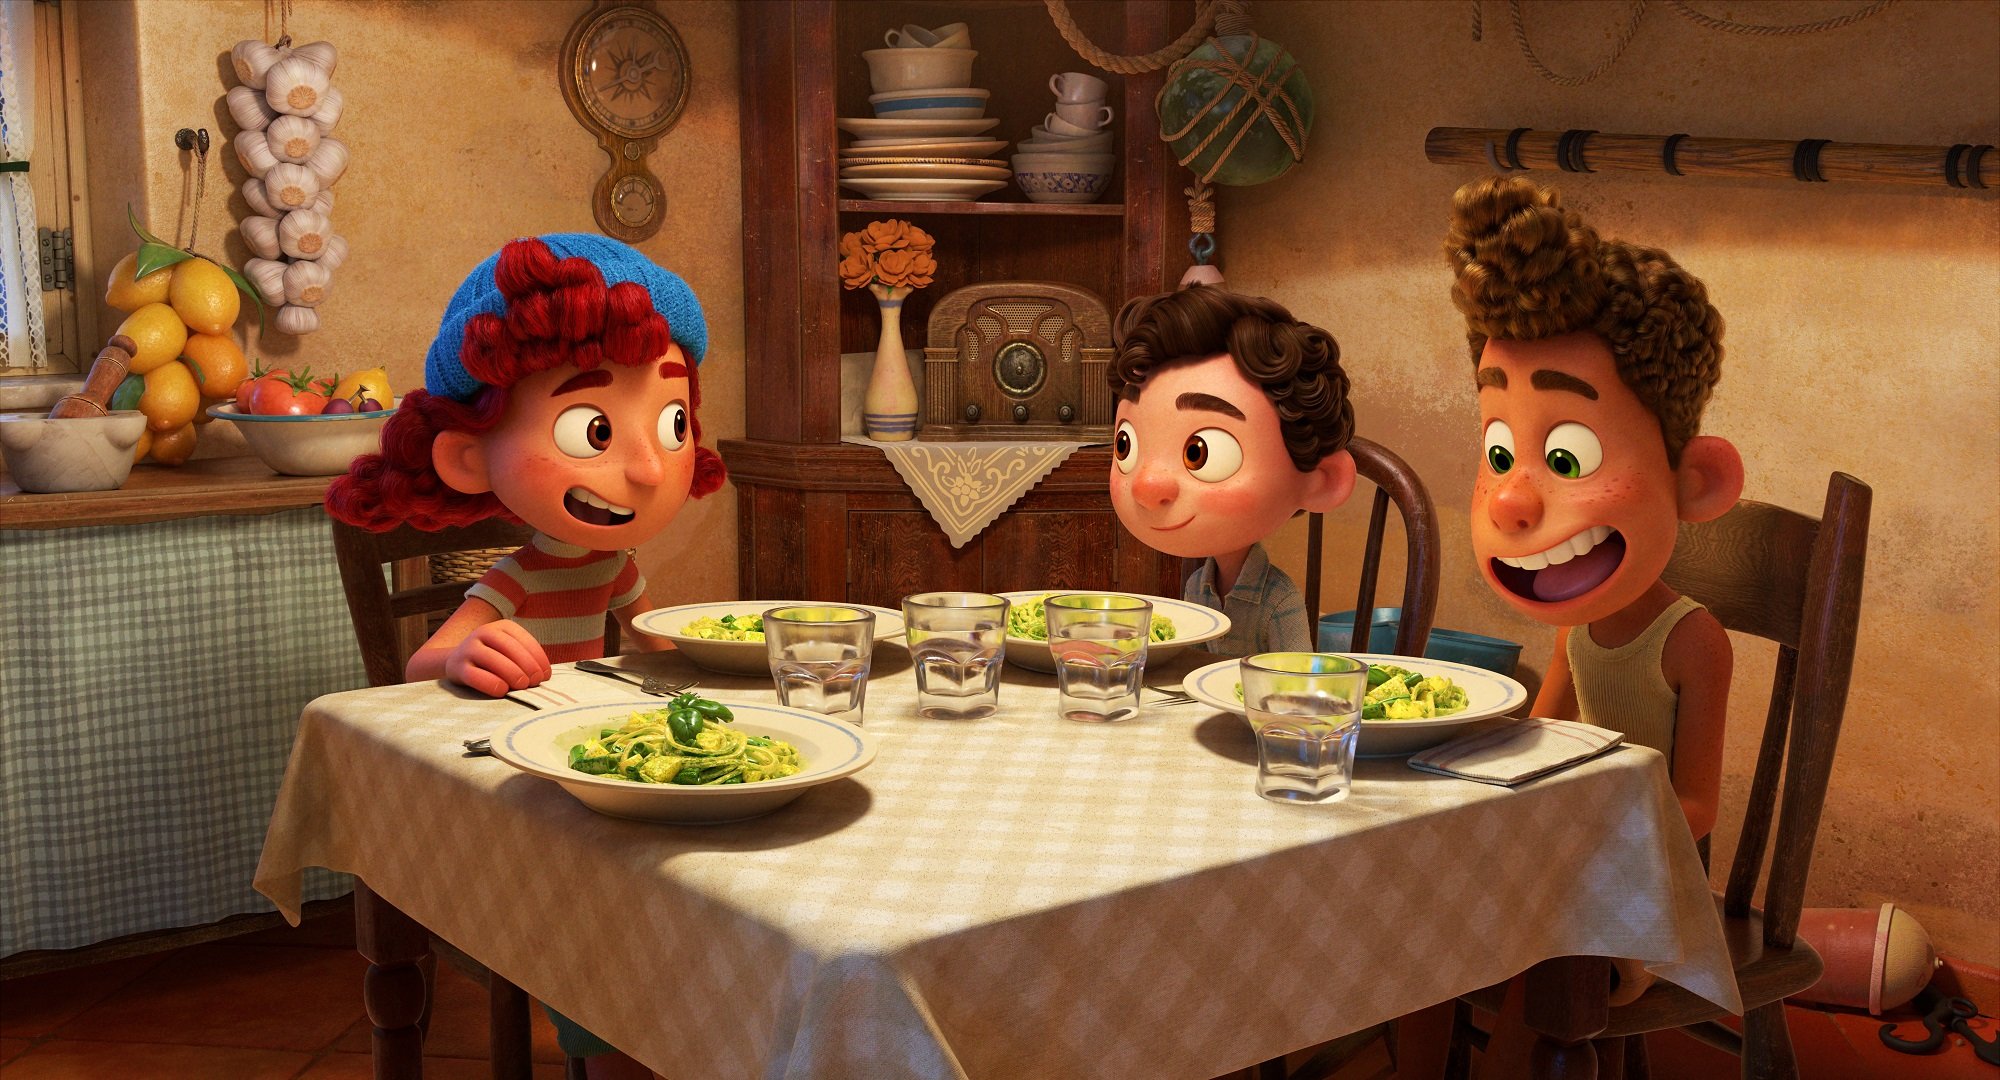 Luca and Alberto have dinner with Giulia in the Luca movie